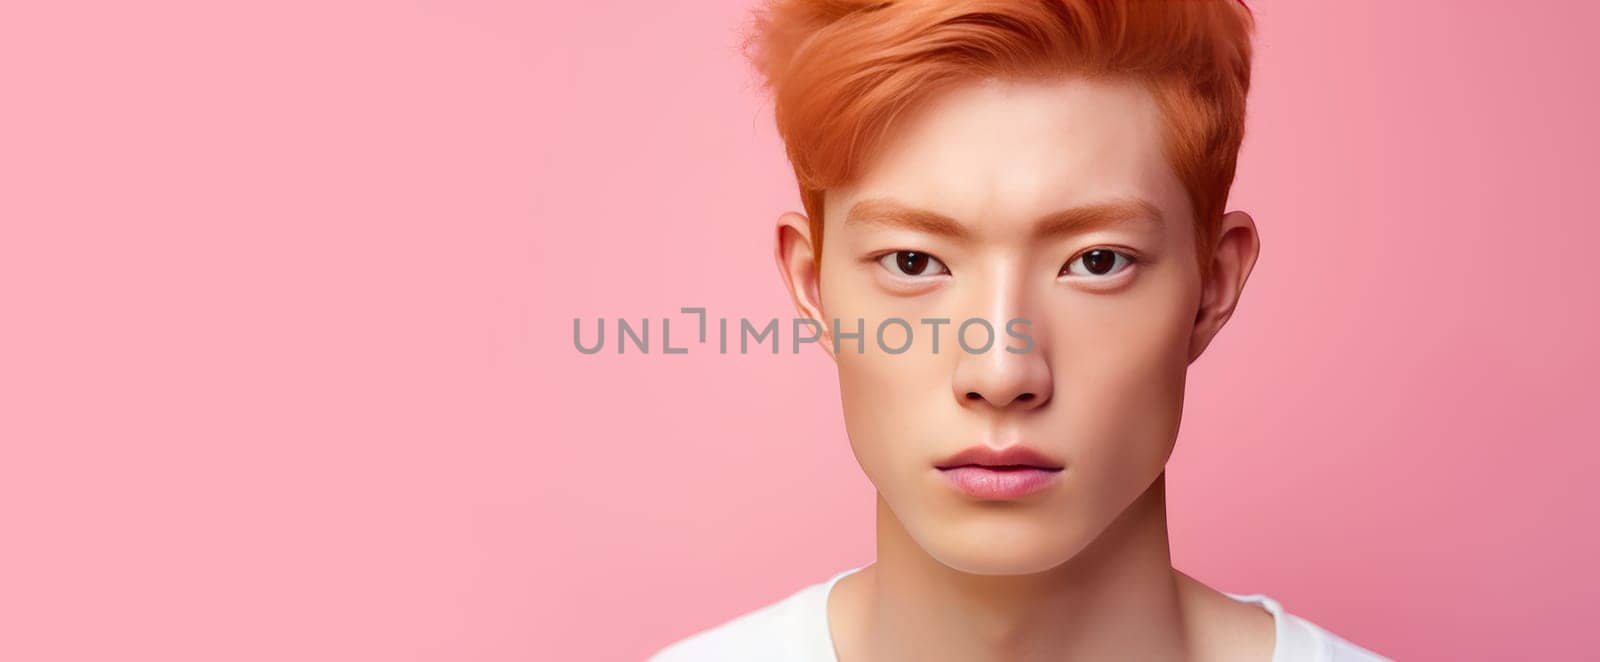 Elegant handsome young male Asian guy with short red hair, on a pink background, banner, copy space, portrait. Advertising of cosmetic products, spa treatments, shampoos and hair care products, dentistry and medicine, perfumes and cosmetology for men